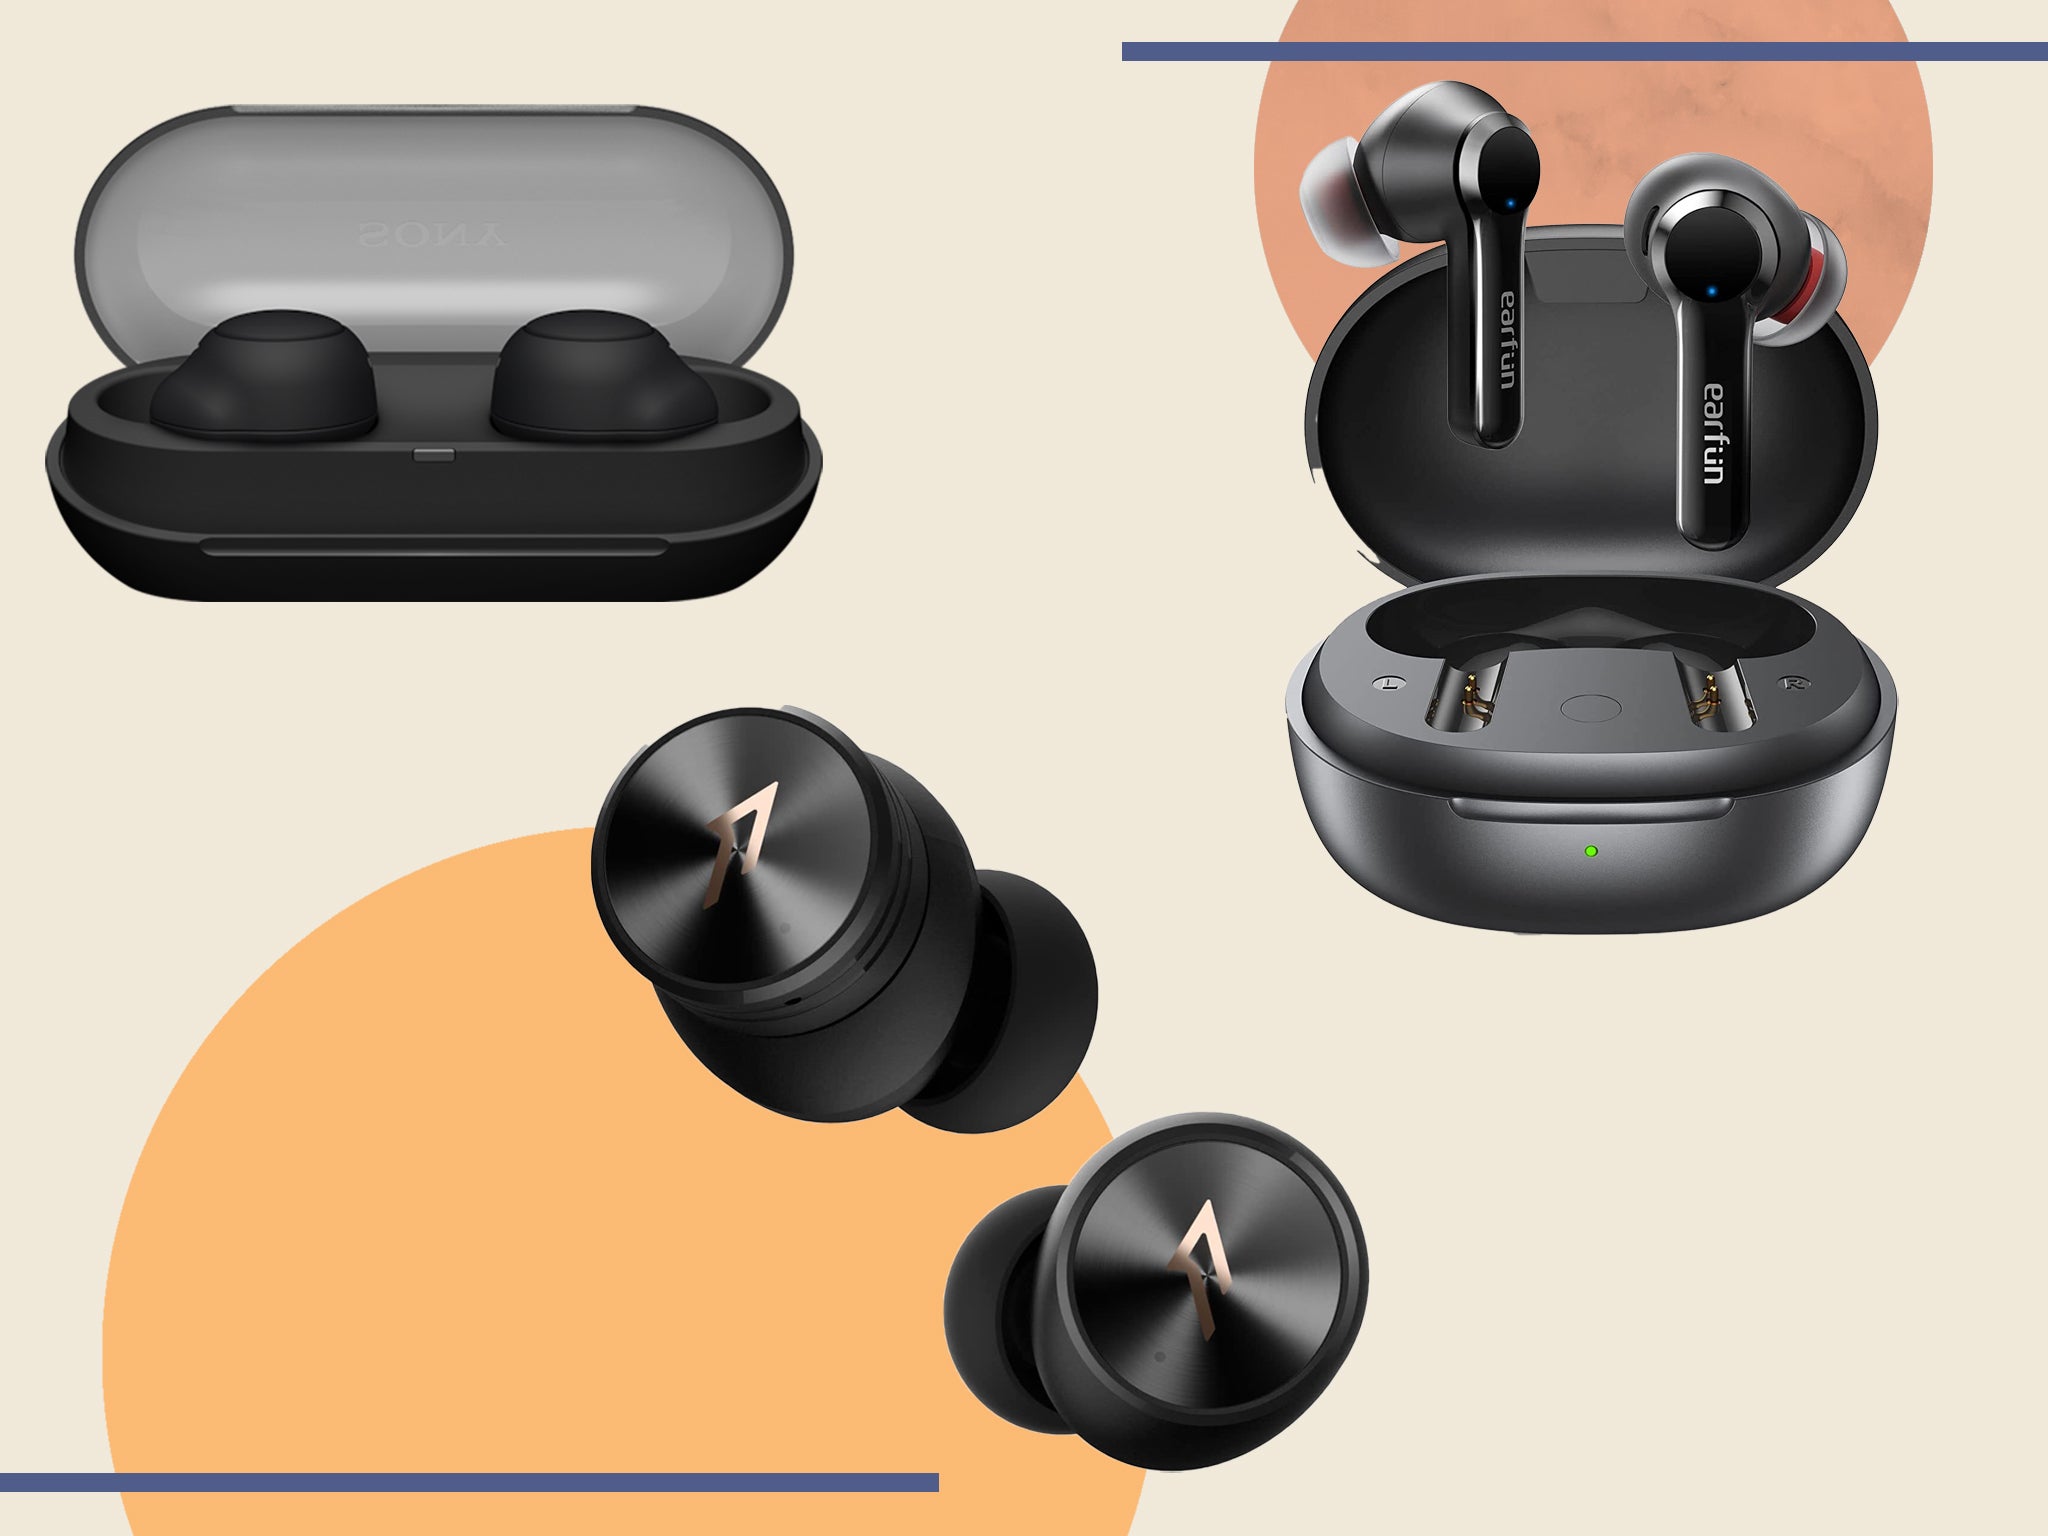 We judged the earphones on quality of sound, design and, of course, value